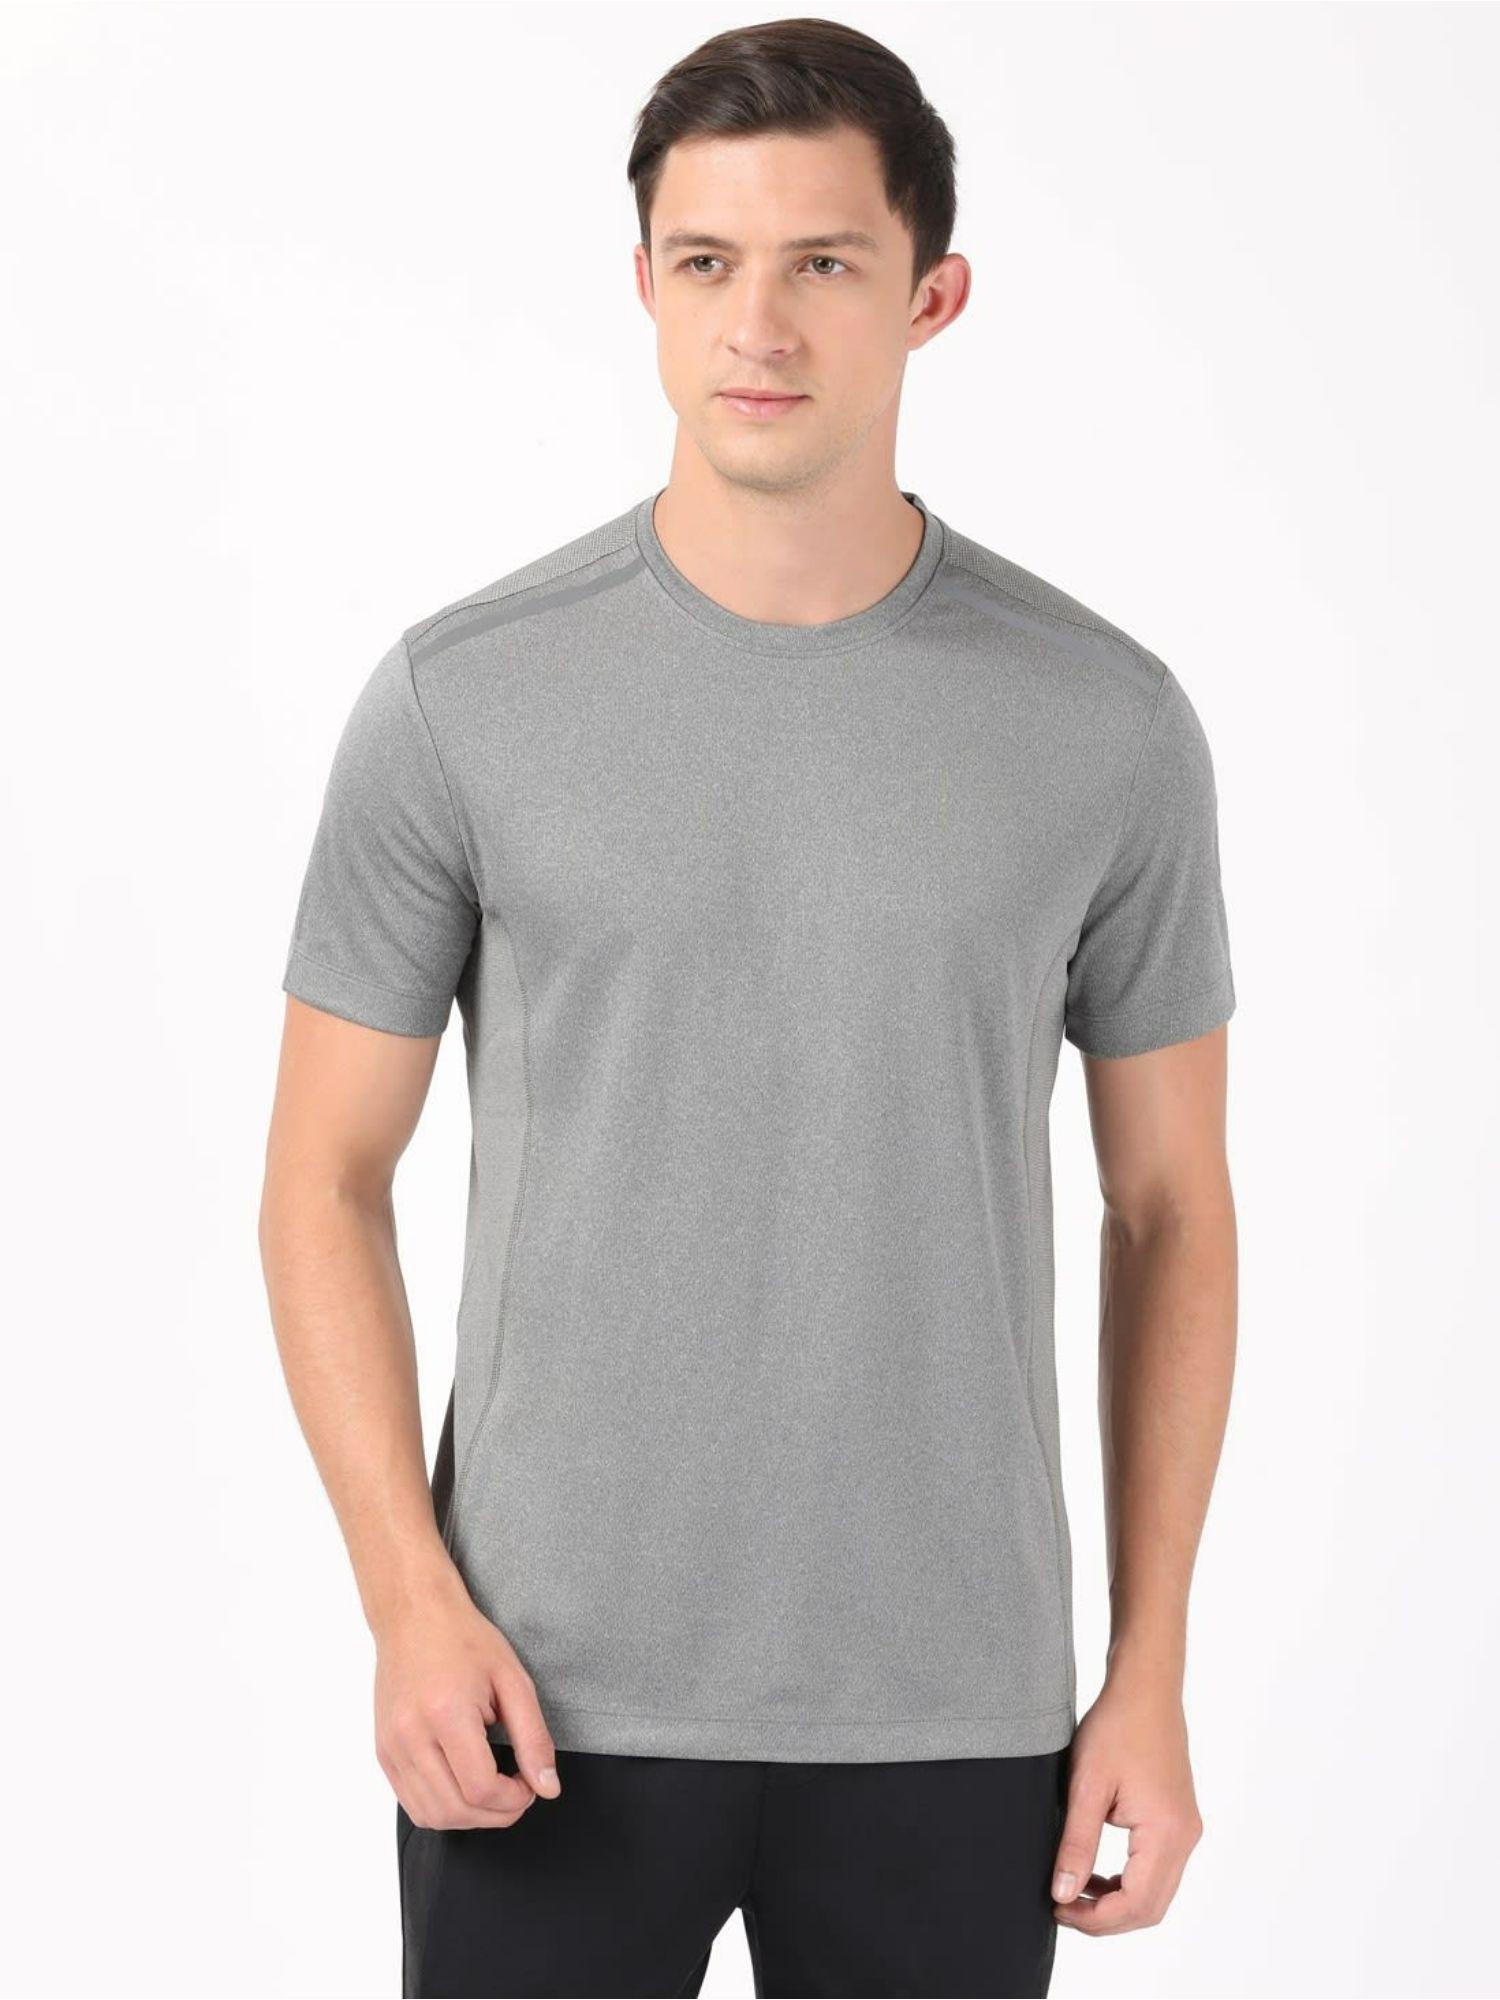 mv35 round neck microfiber t-shirt with breathable mesh & stay fresh treatment grey